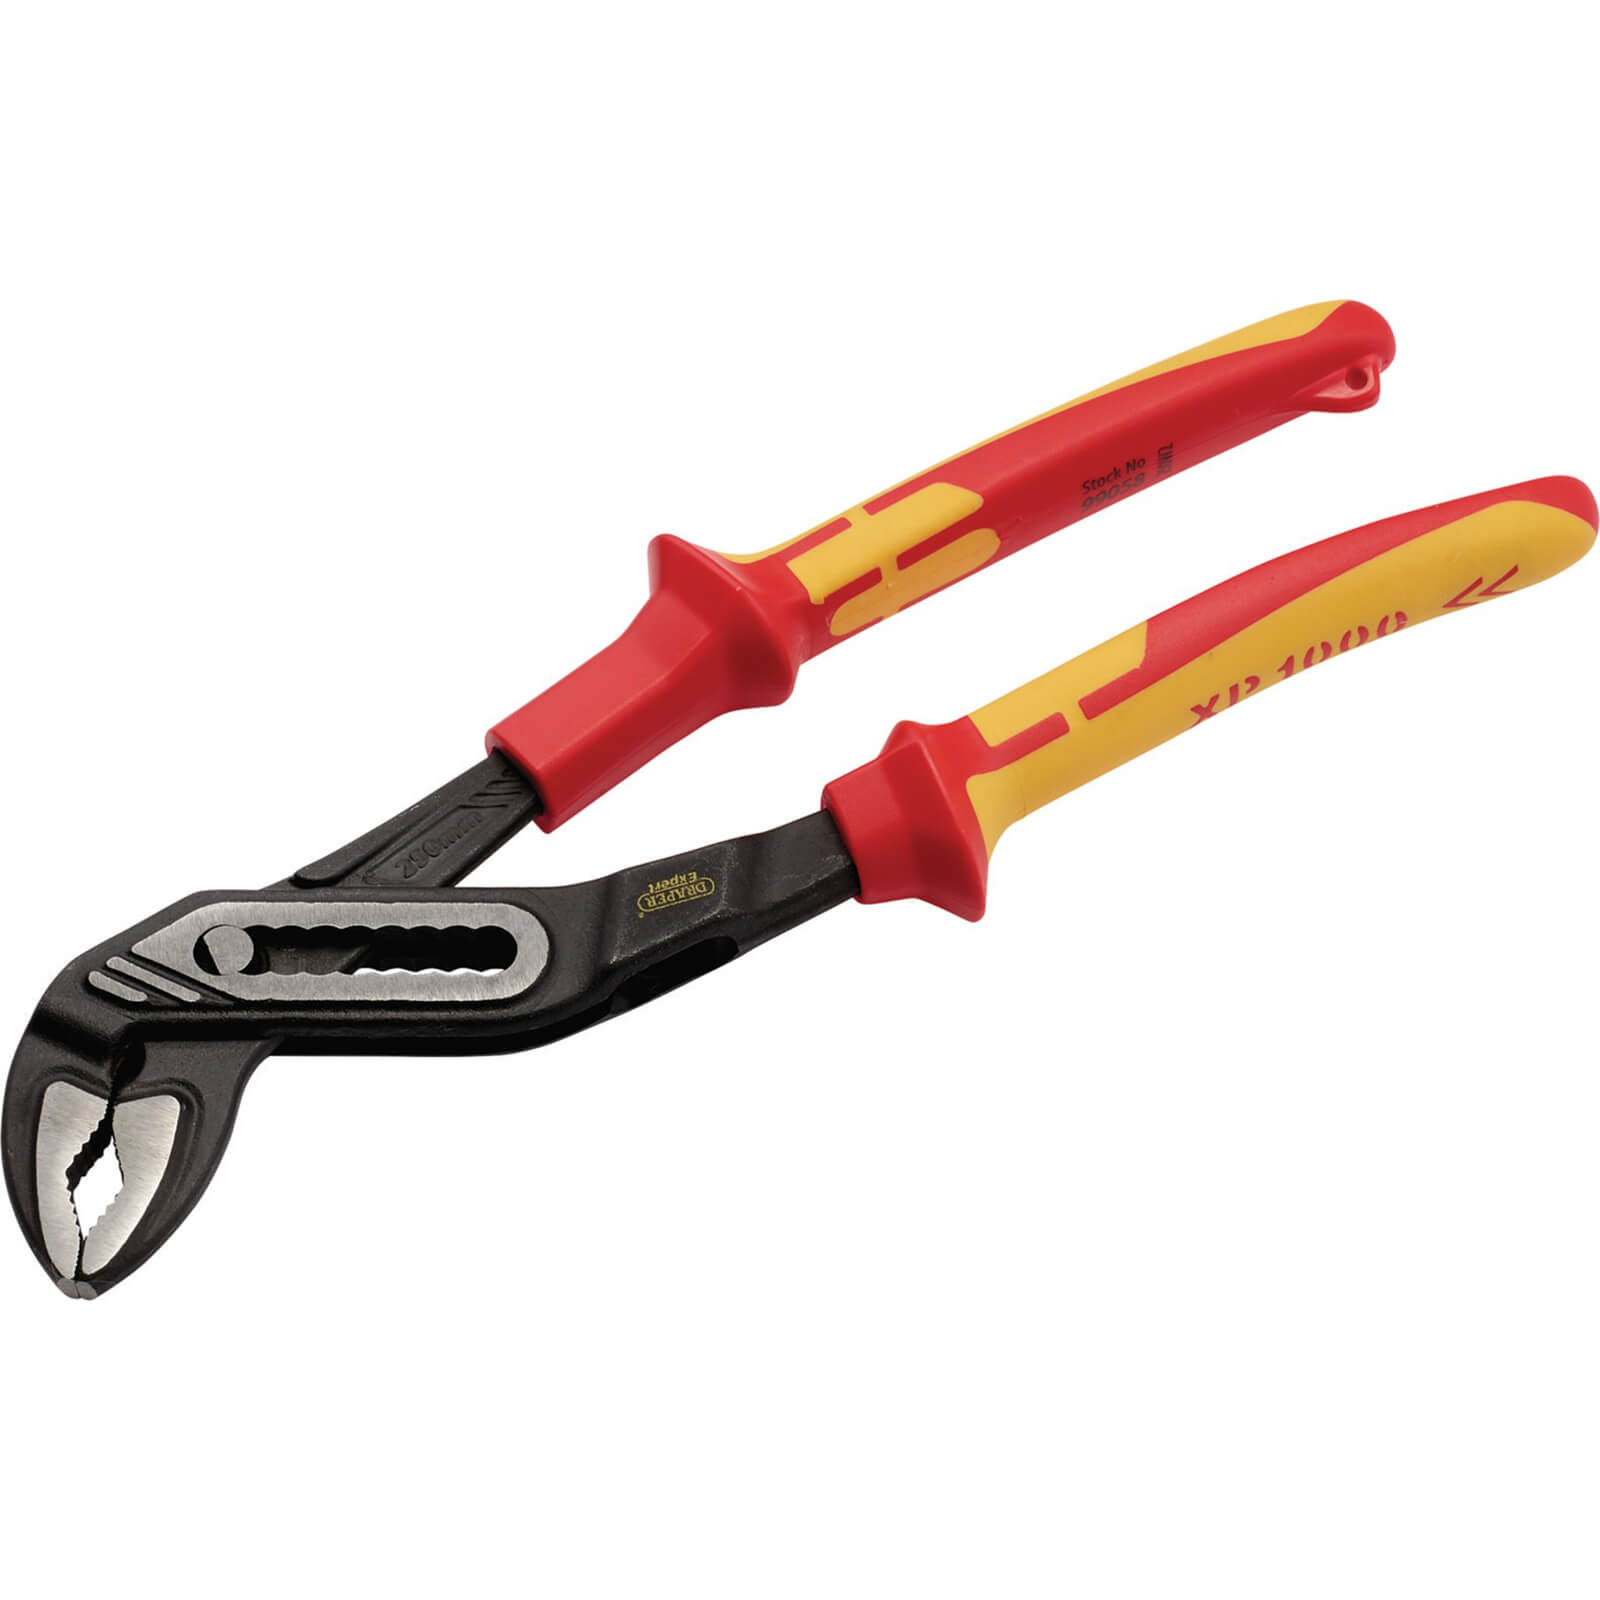 Draper XP1000 VDE Insulated Tethered Water Pump Pliers 250mm